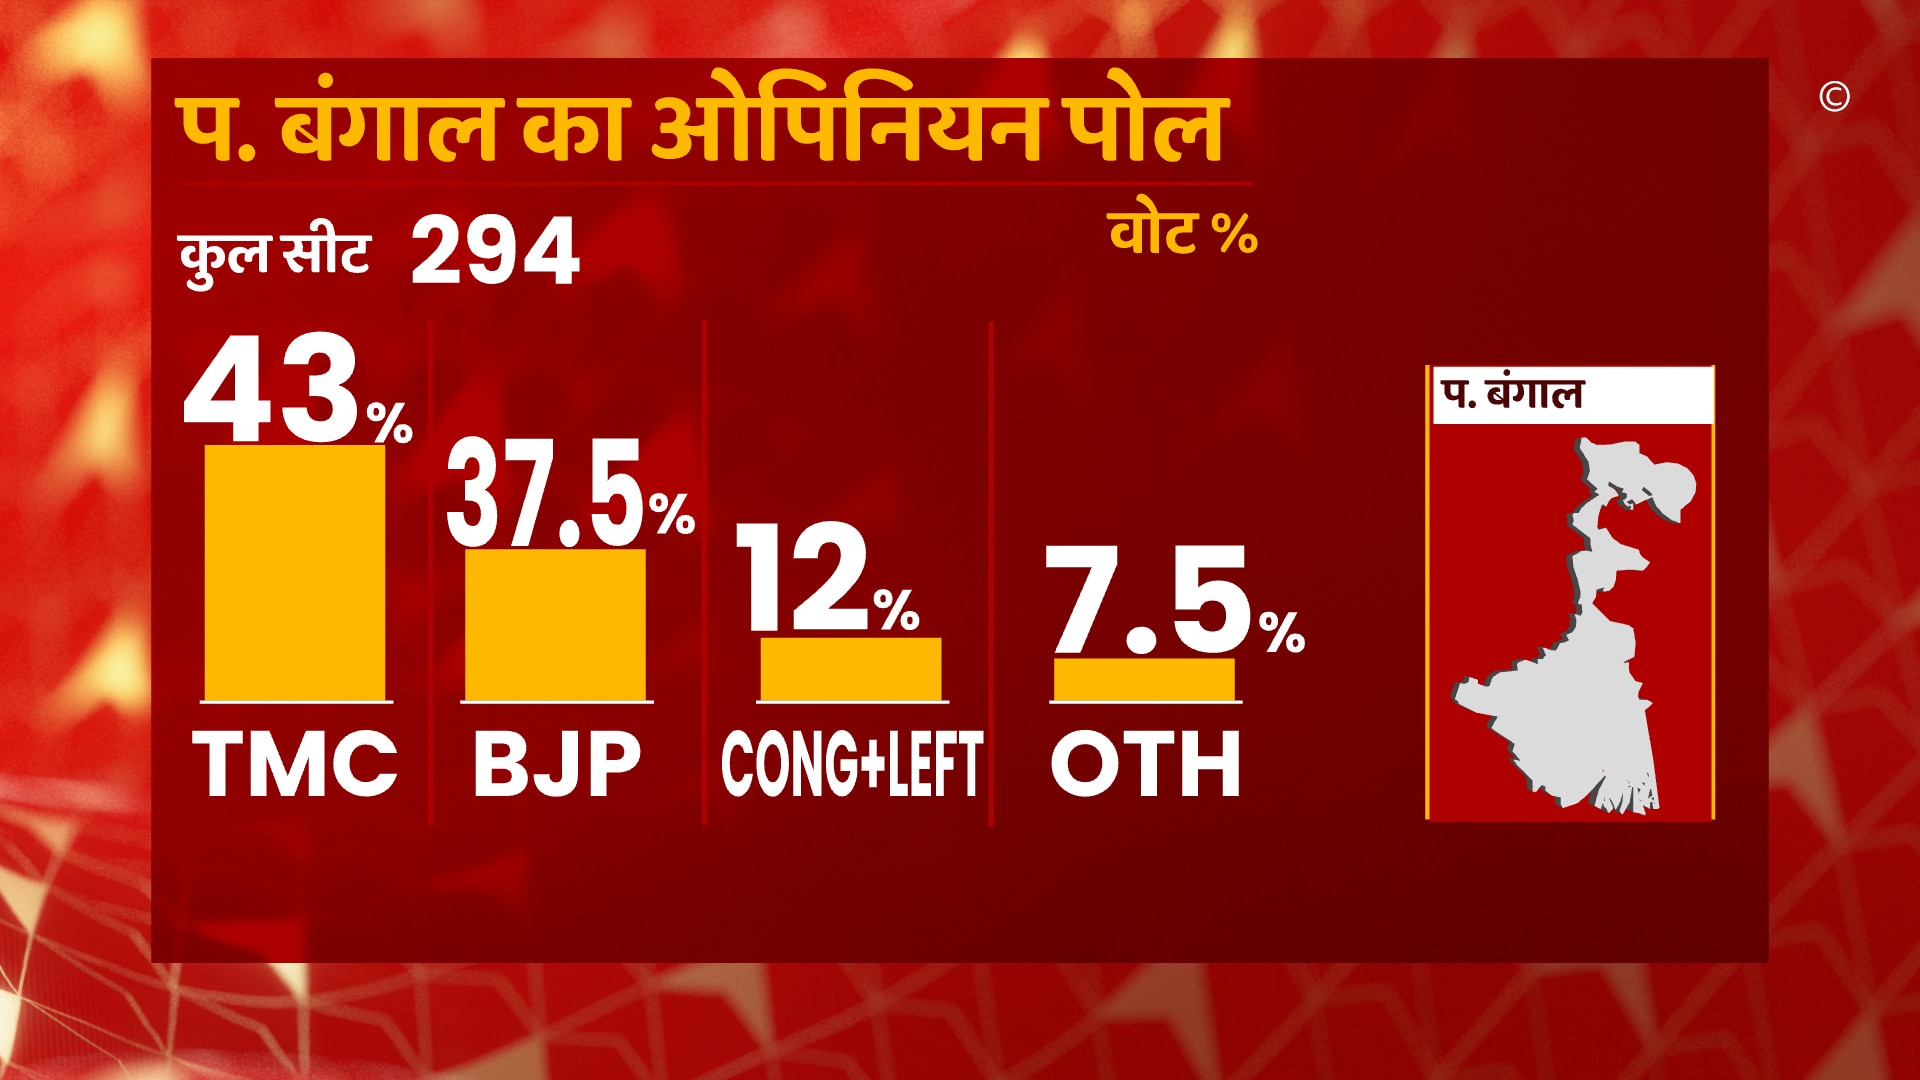 abp ananda exit poll